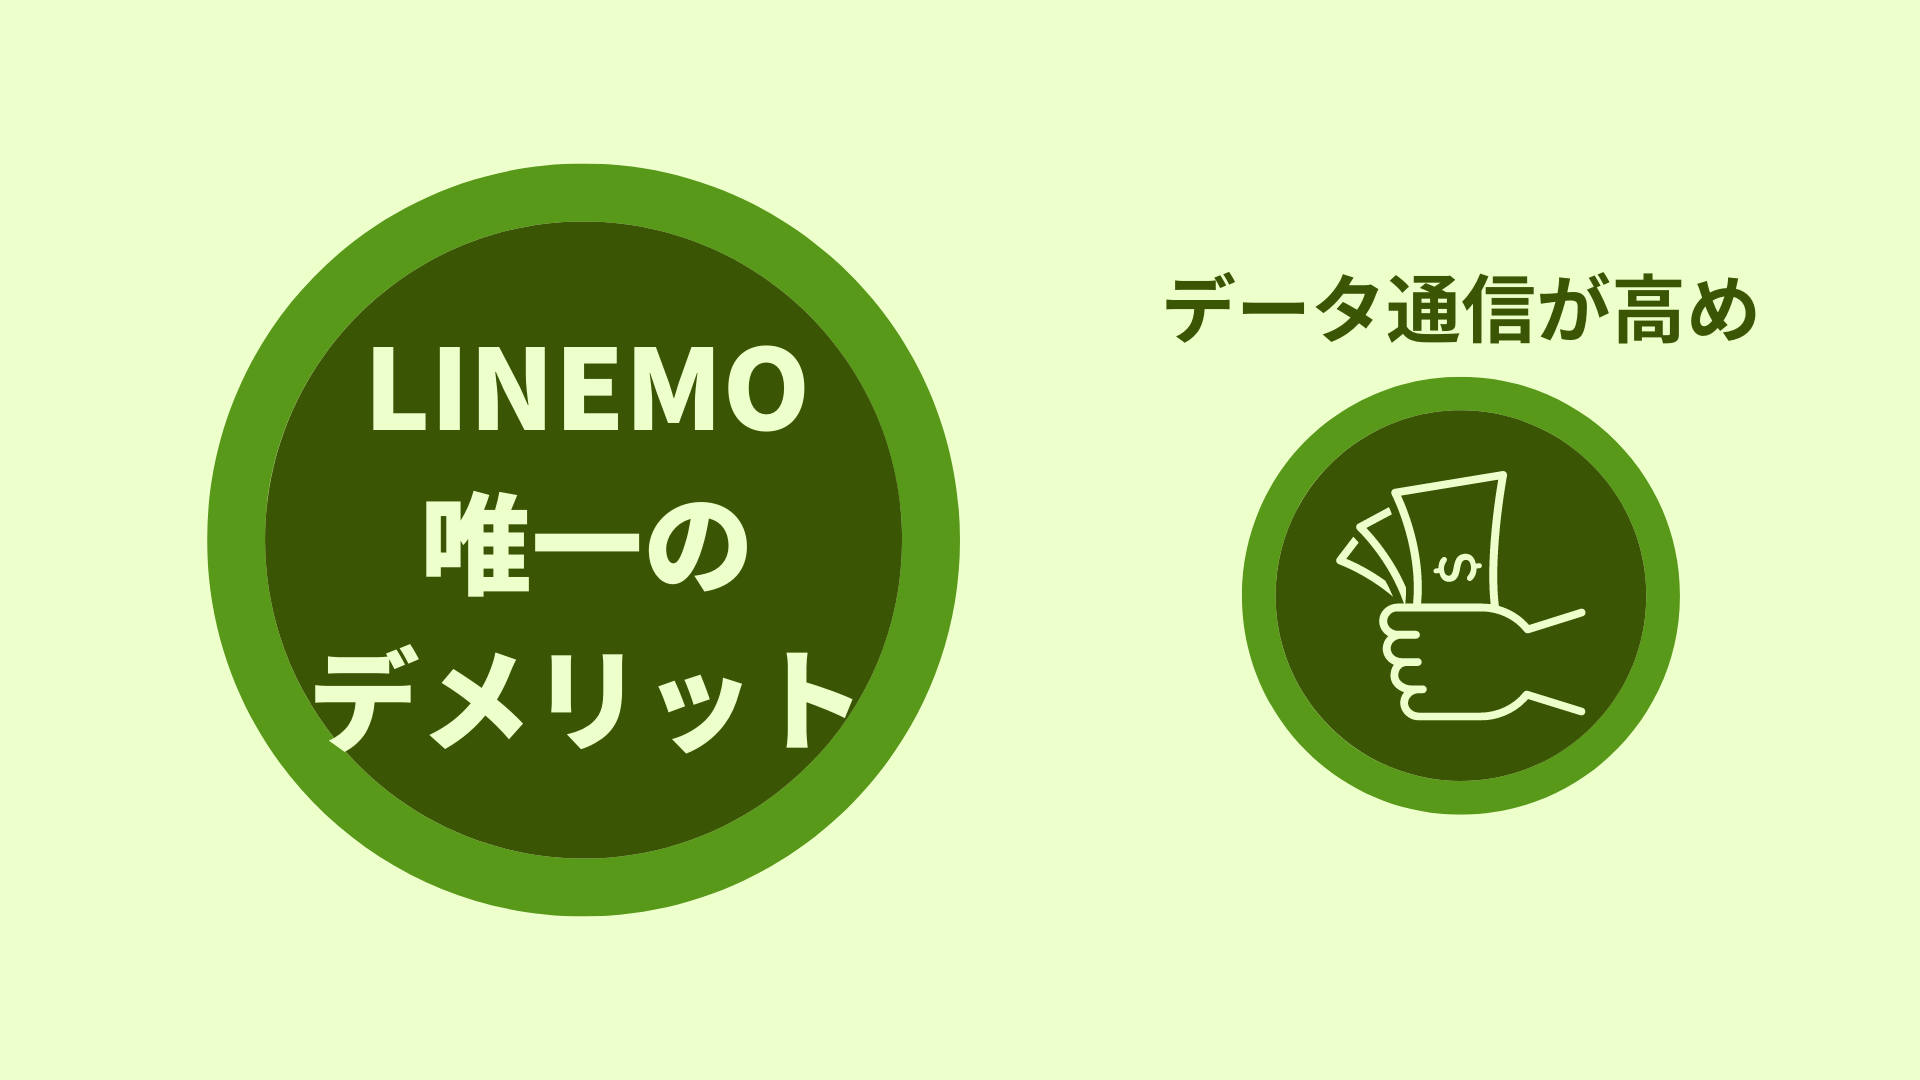 LINEMOを一時帰国に使うデメリット: 20GBの料金が高い